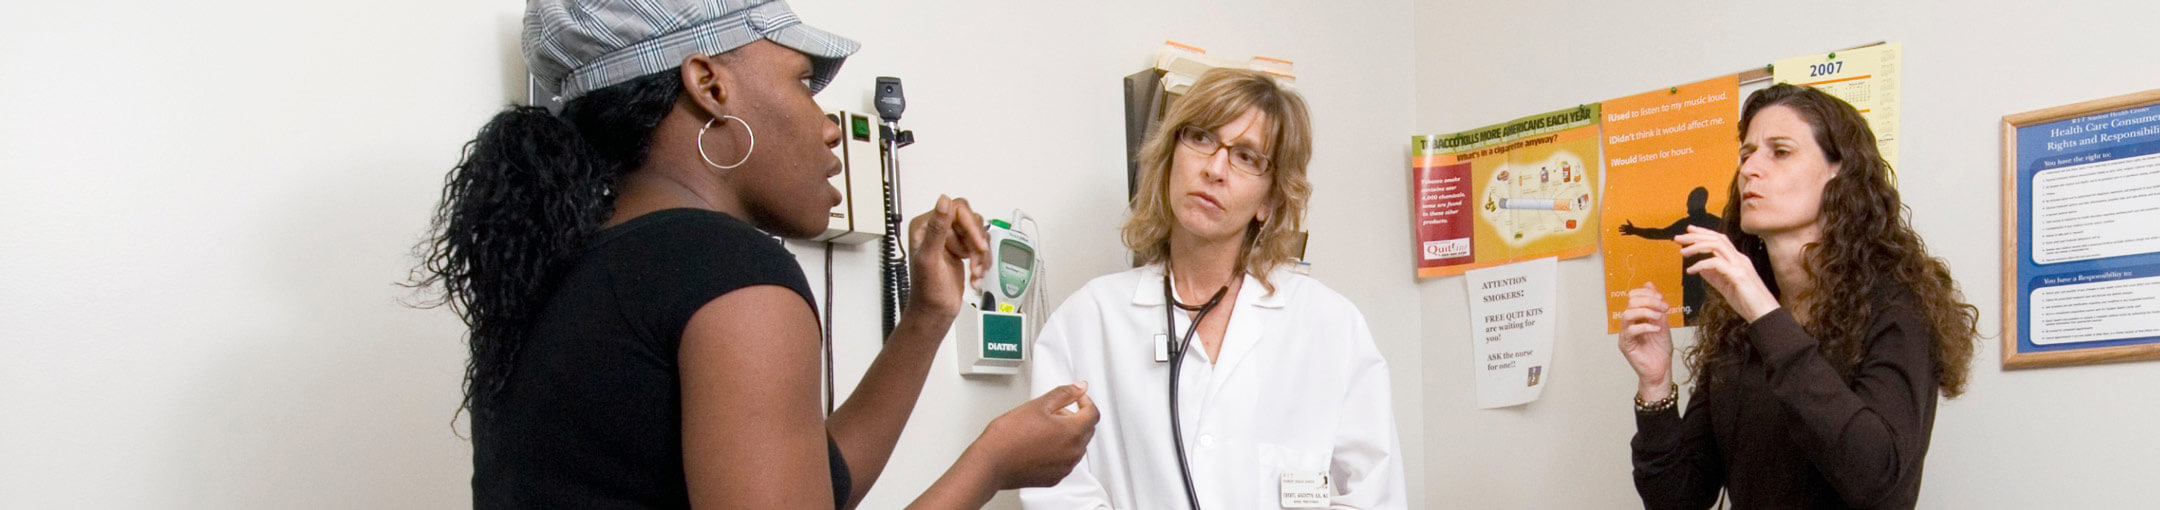 A patient communicating with a doctor in an exam room with an interpreter.